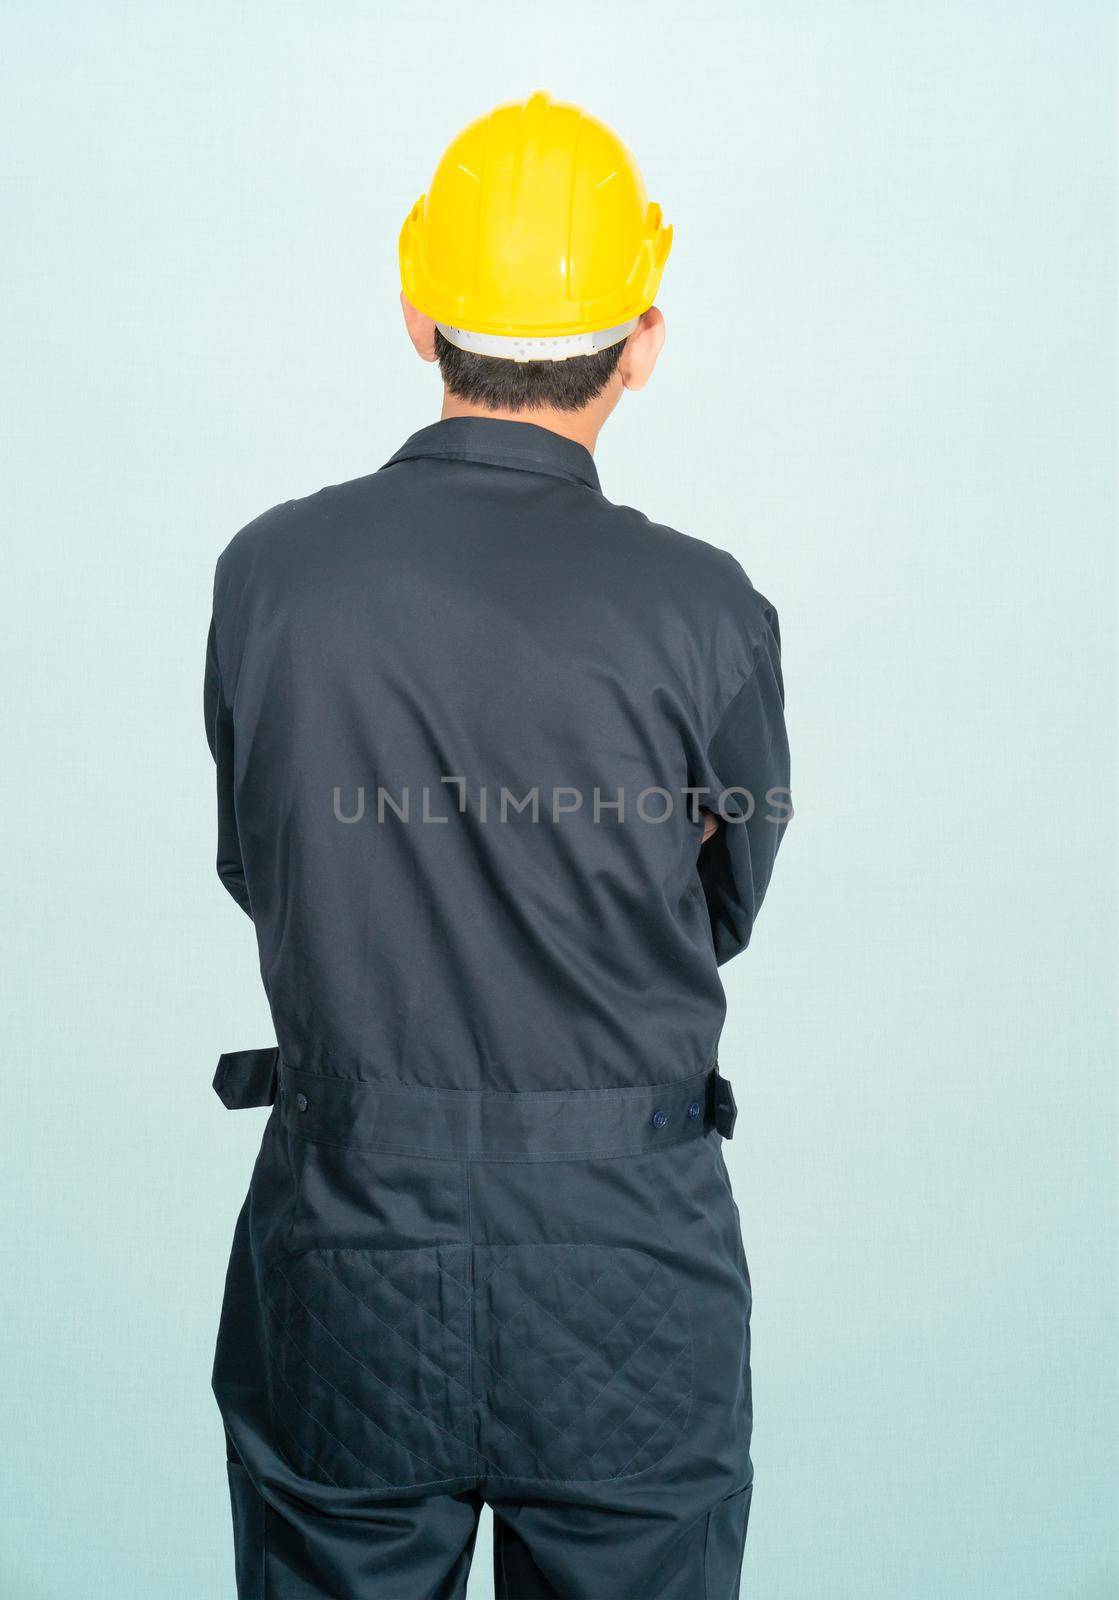 Young man in coveralls helmet hardhat isolated on blue background